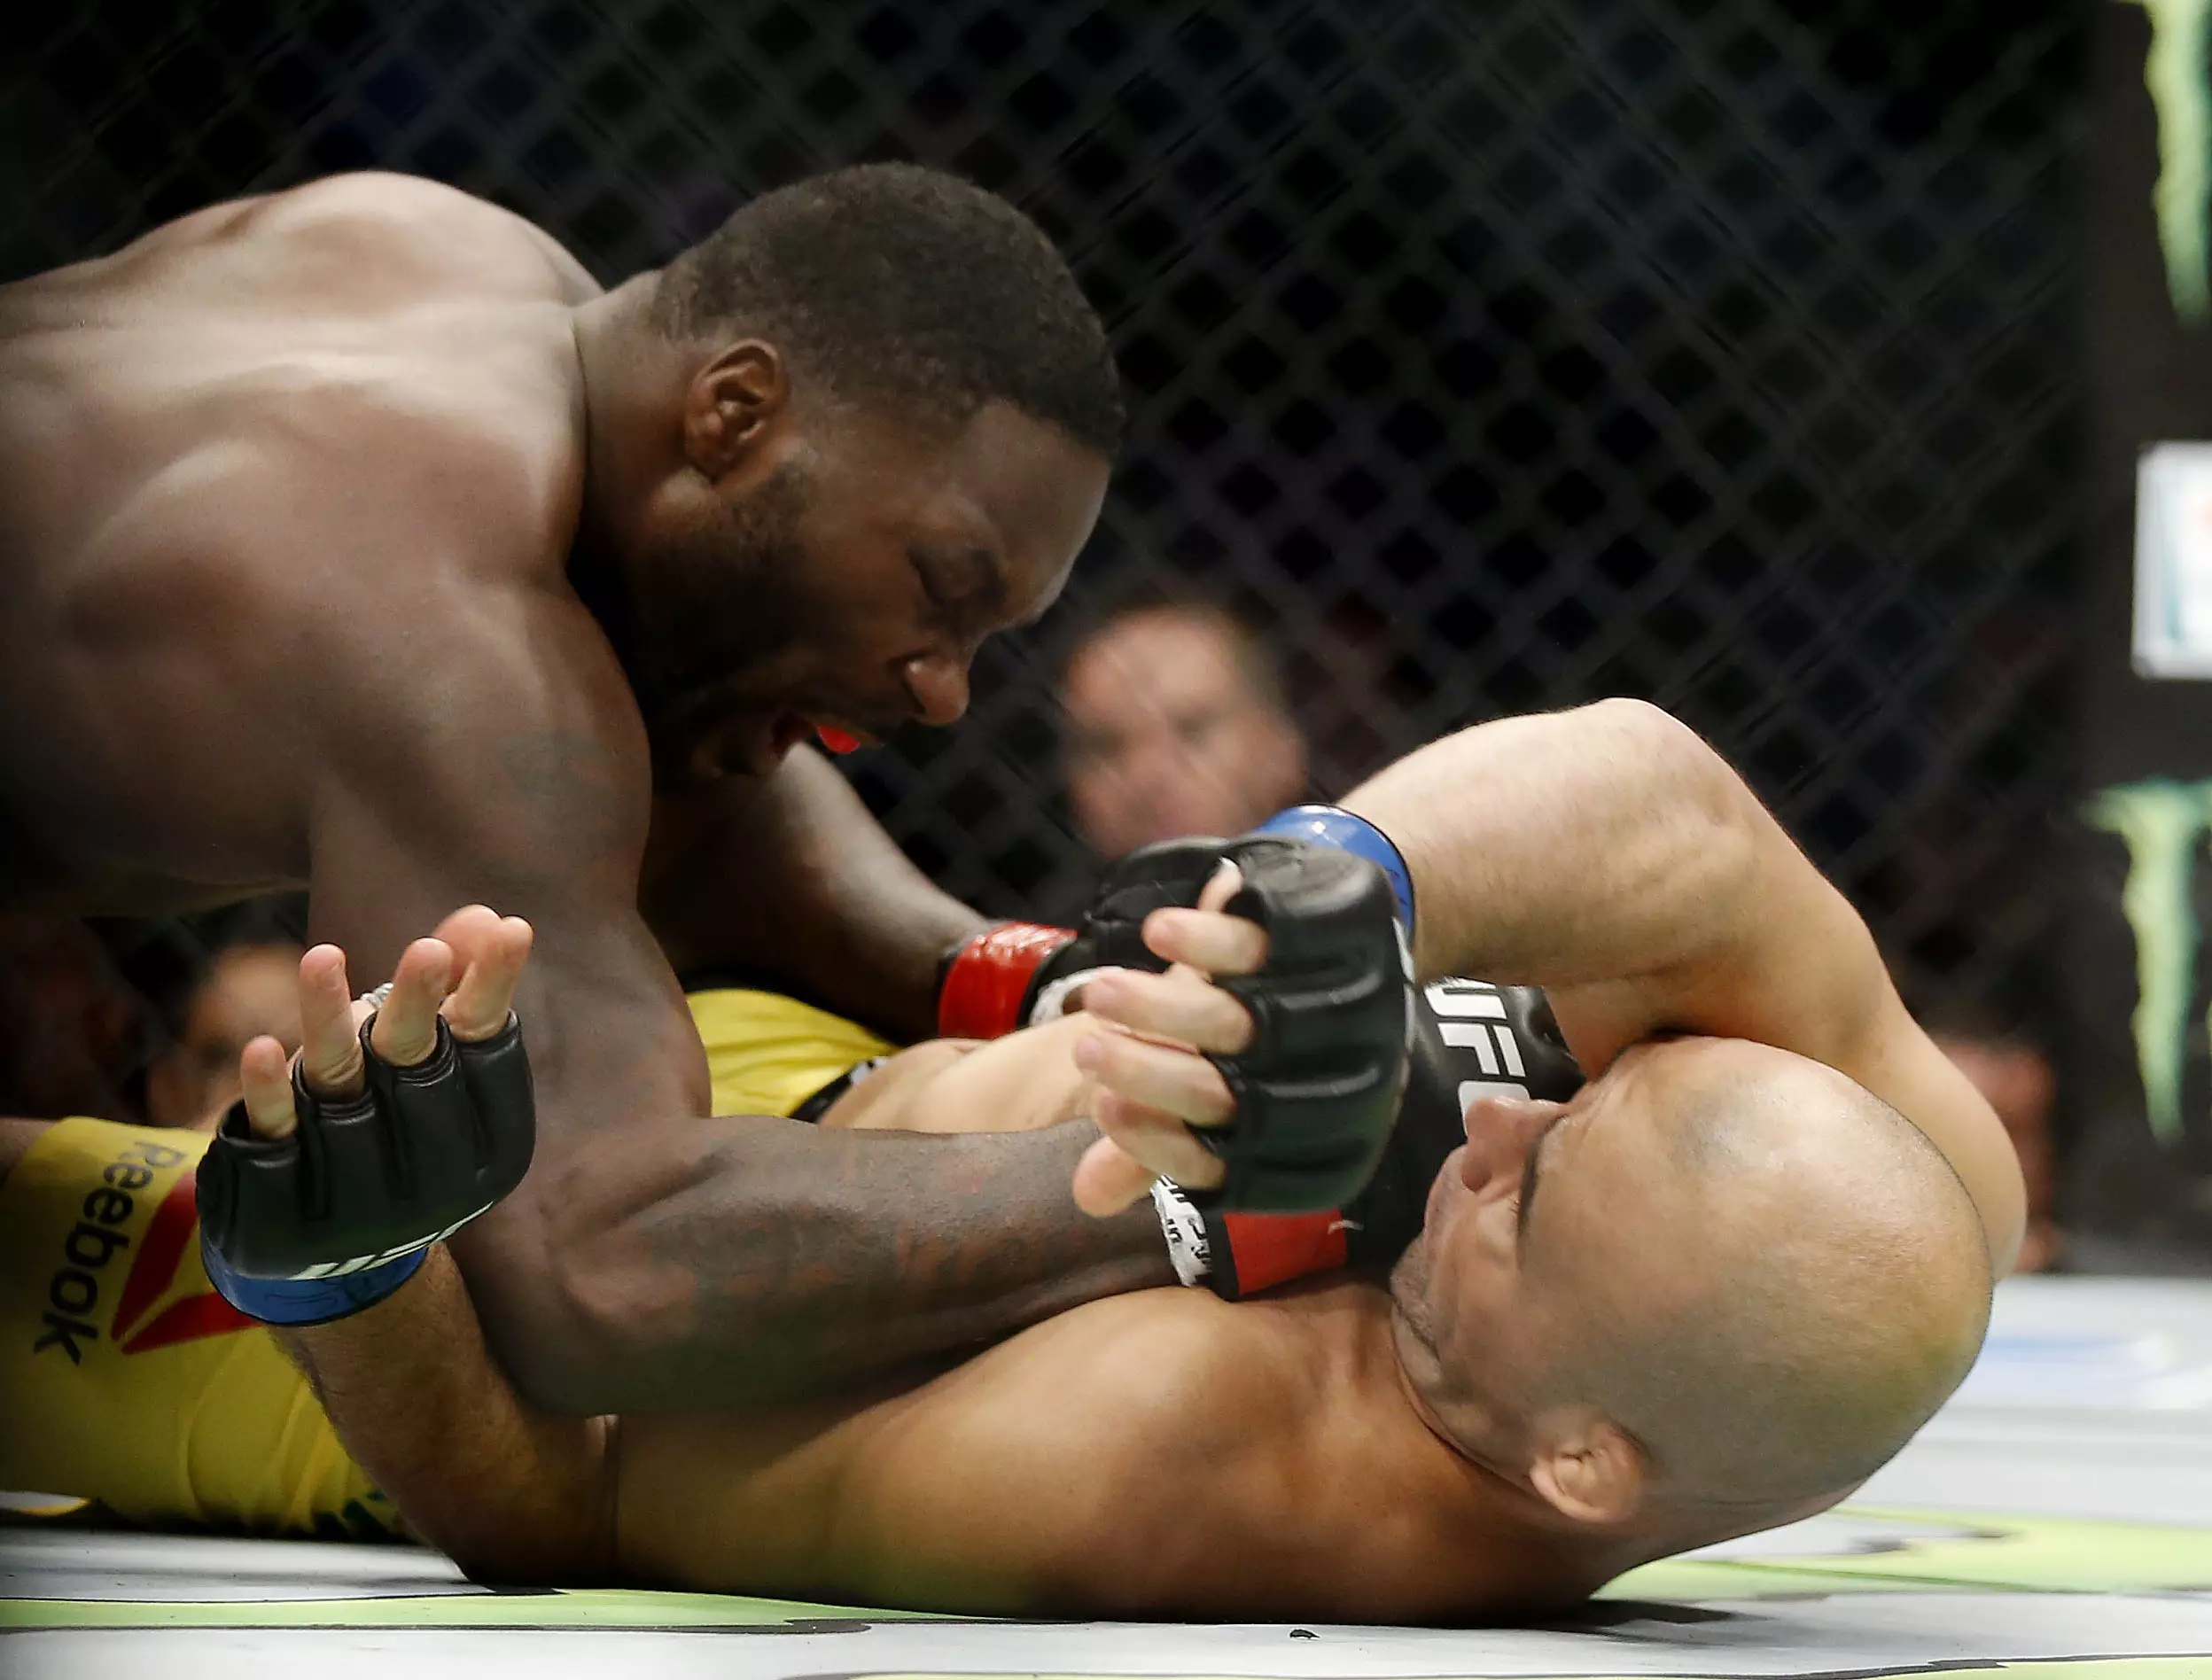 WATCH: Glover Teixeira Lose His Tooth Thanks To Brutal Uppercut By Anthony Johnson 